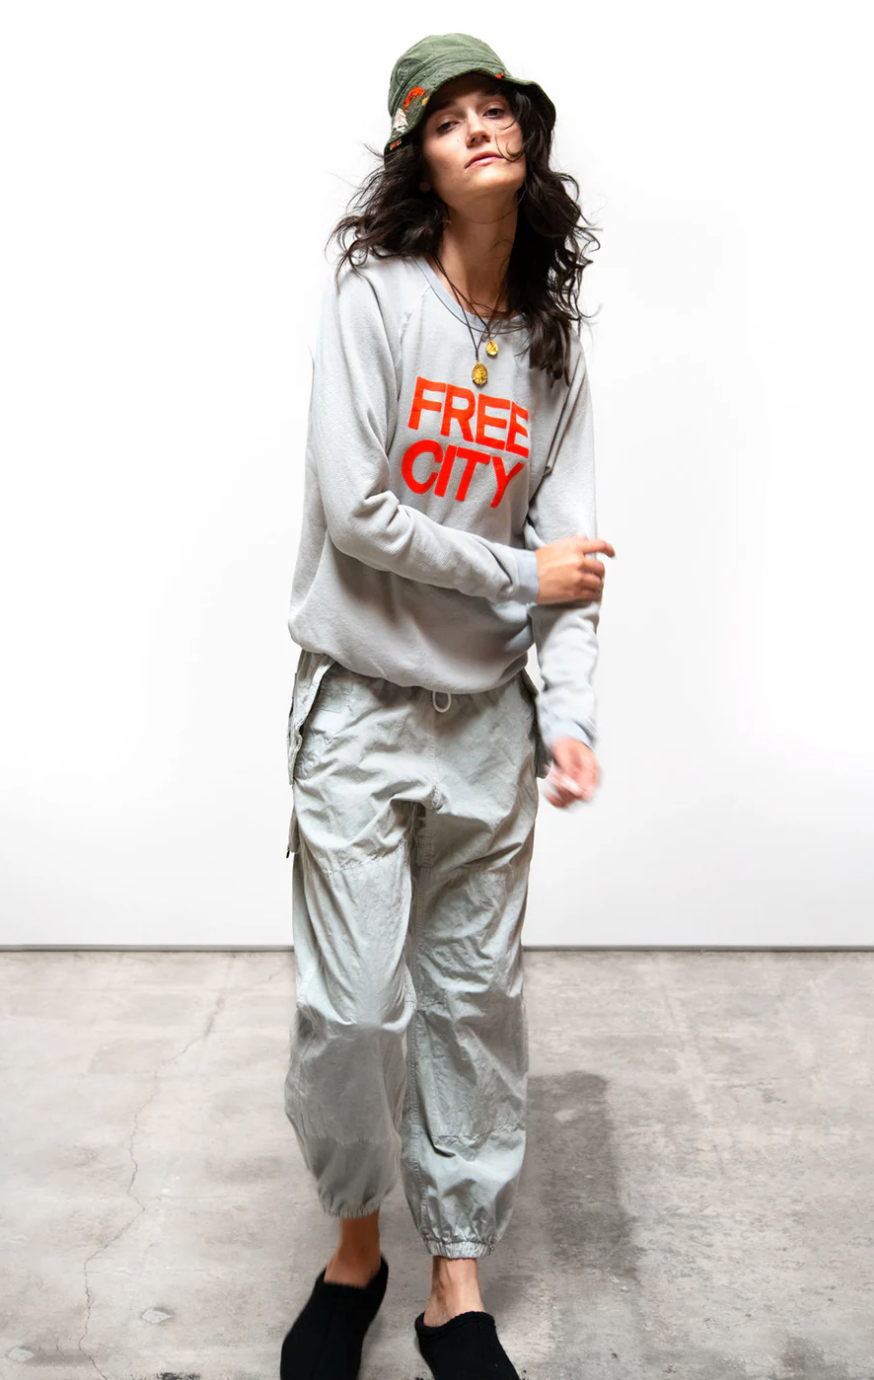 A woman in casual attire, wearing an orange Free City (sparrow, LLC) &quot;FREECITY SUPERYUMM BIGGY RAGLAN&quot; sweatshirt and grey pants, dances with her hair tossed mid-movement against a plain white background.